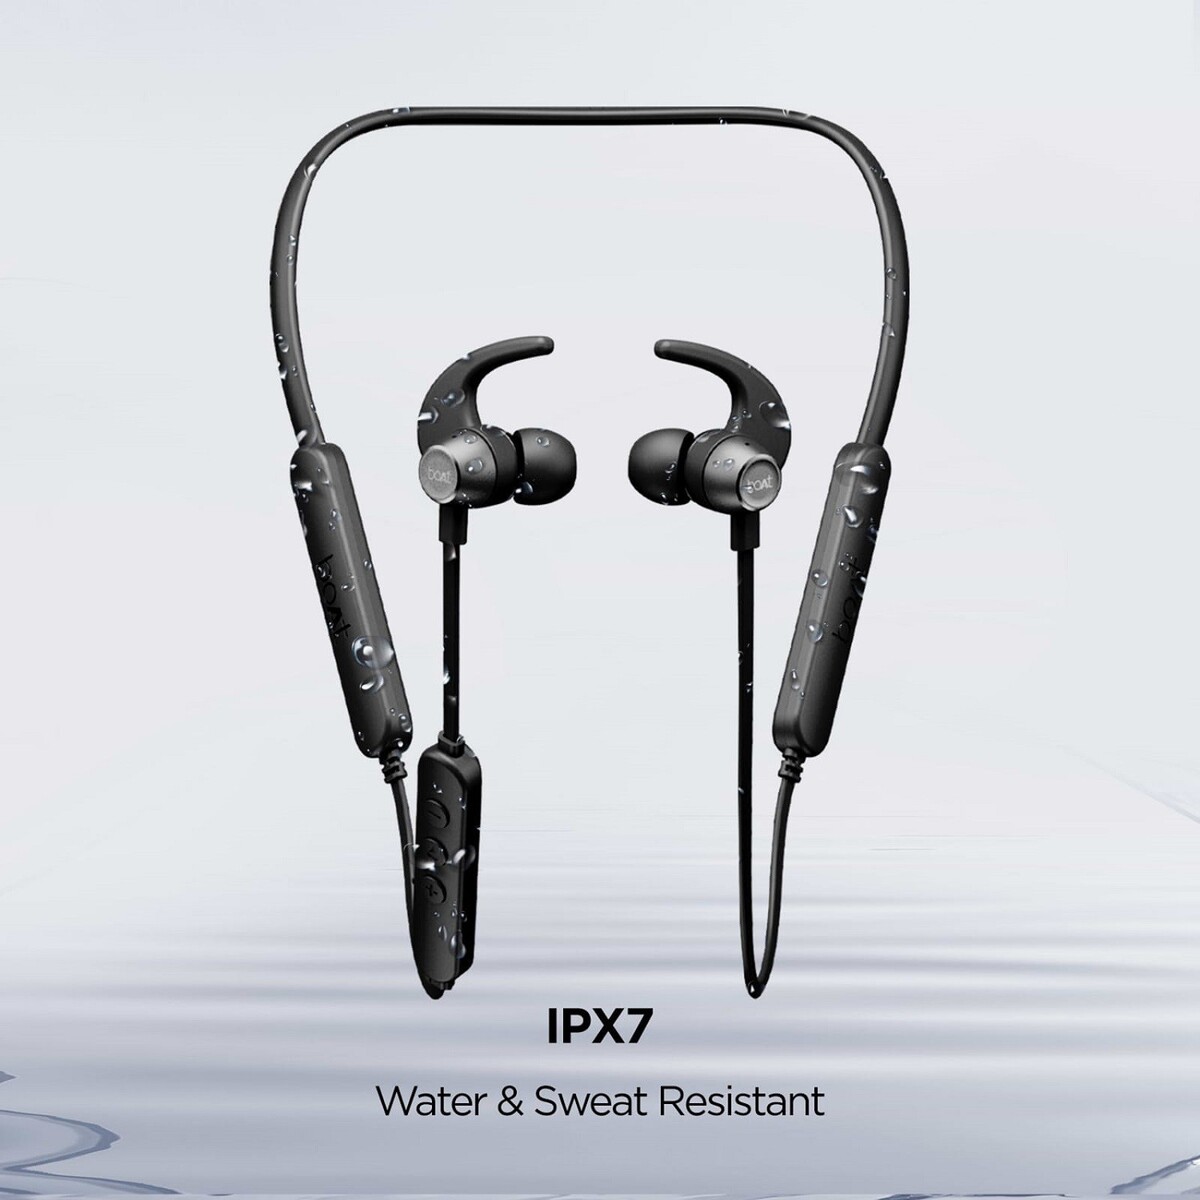 Boat Rockerz 258 Pro+ In-Ear Wireless Earphone with Mic Bluetooth 5.0, Voice Assistant Supported, Active Black